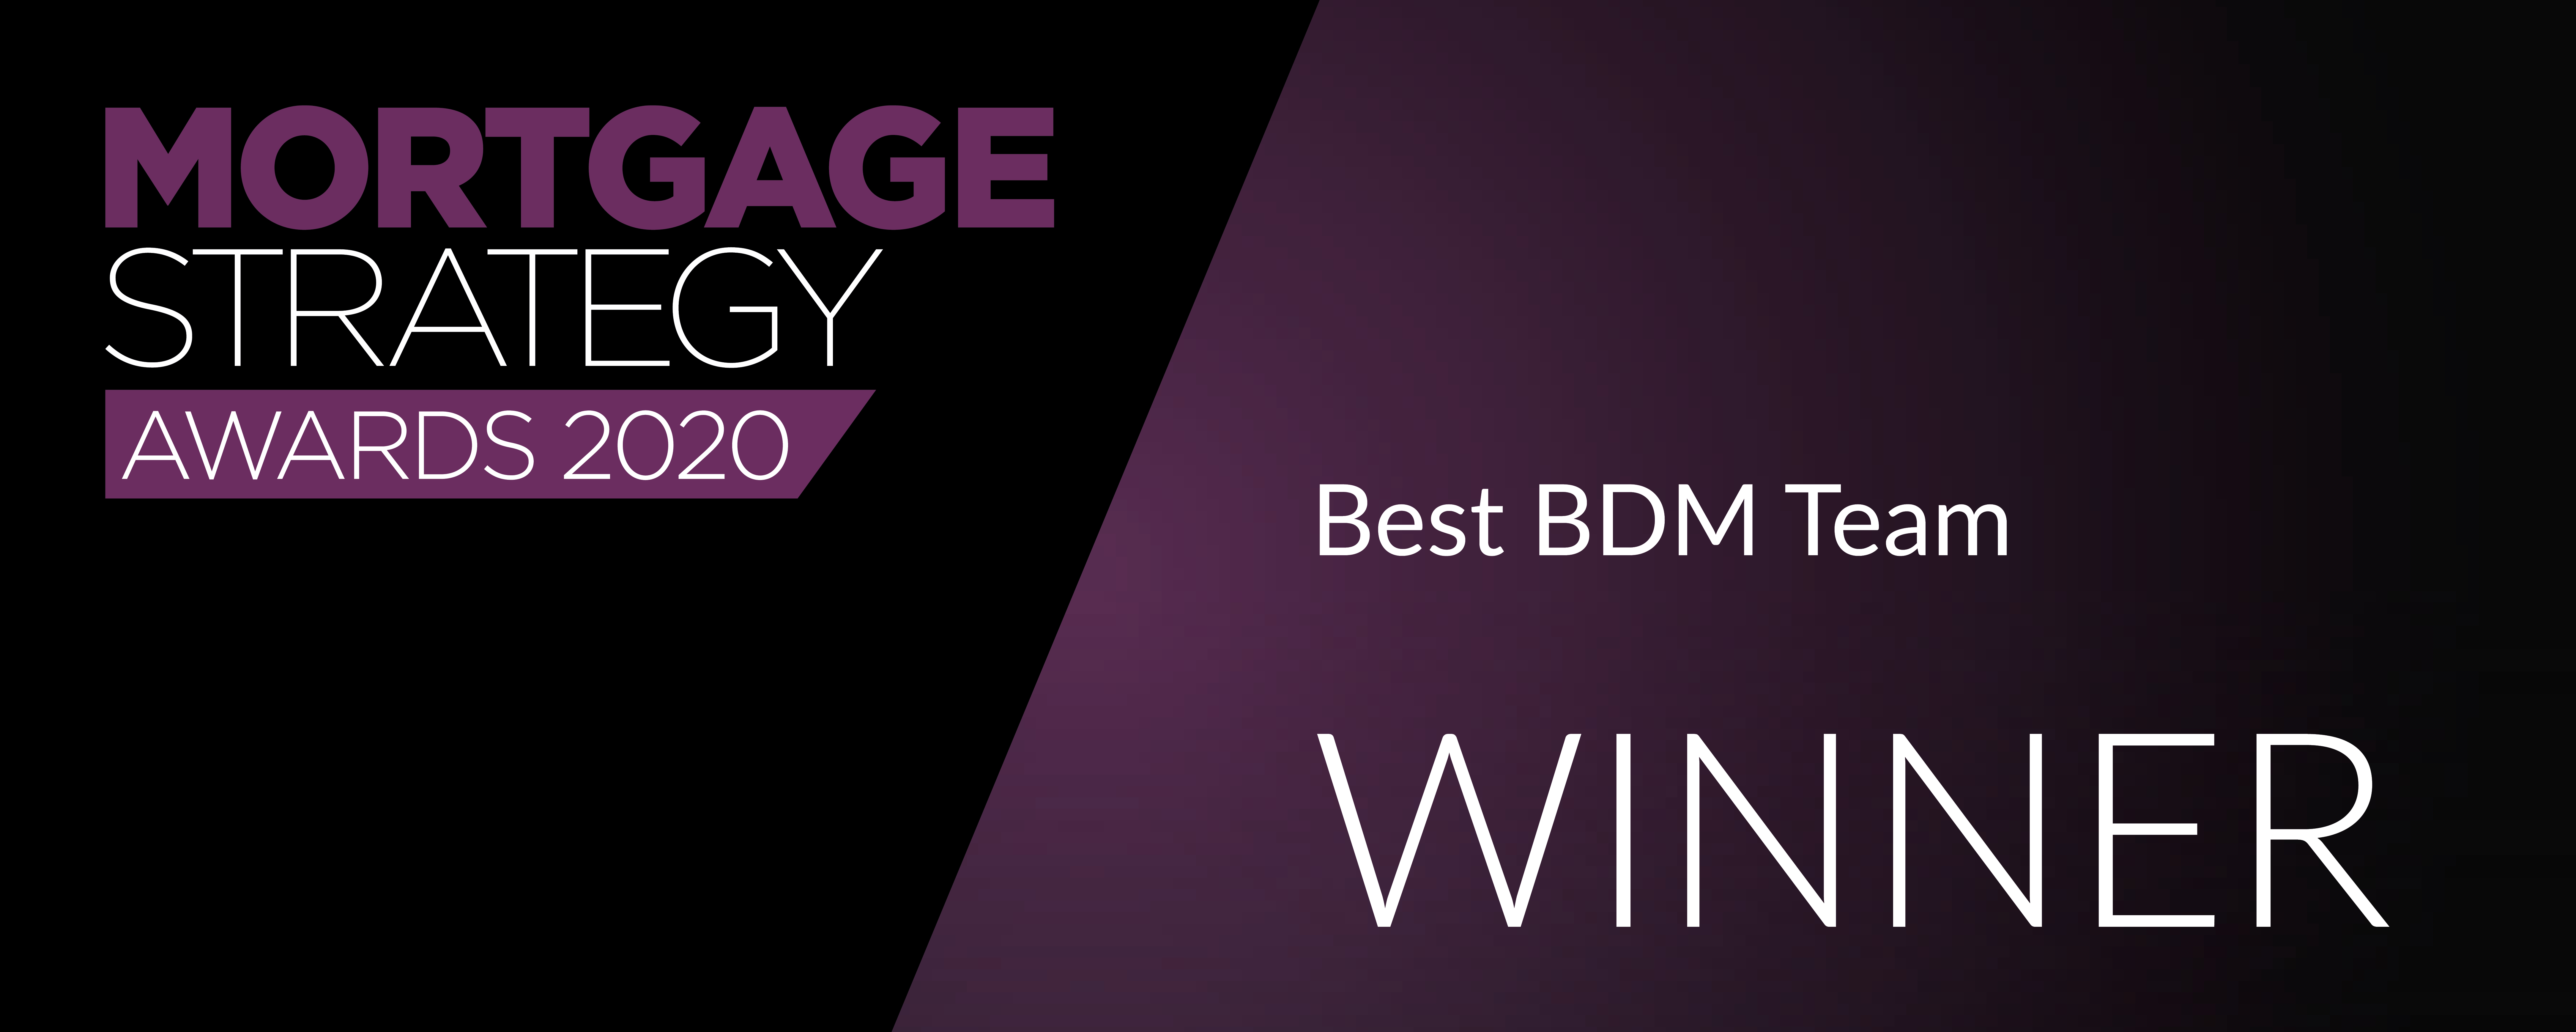 The Mortgage Strategy Awards 2020